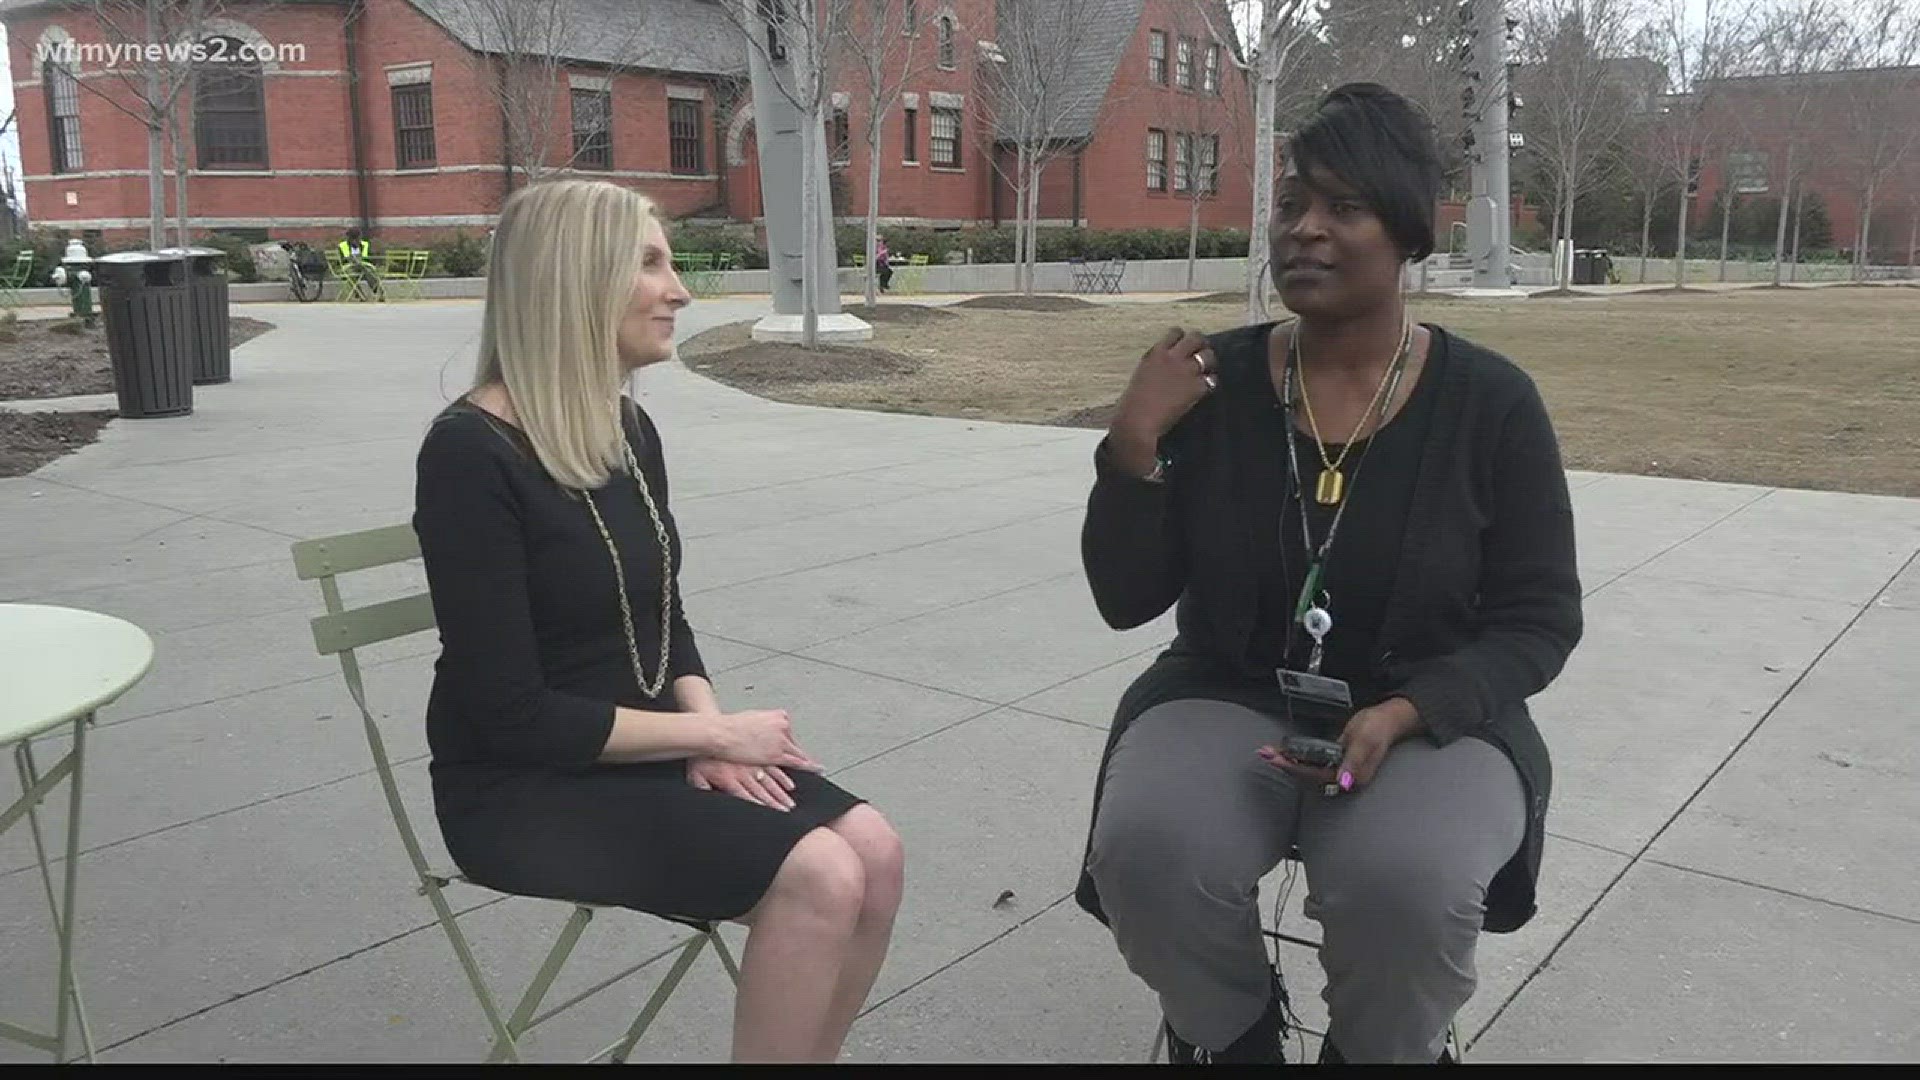 WFMY News 2's Carly Flynn Morgan spent Wednesday afternoon talking with people in LeBauer Park about how Billy Graham influenced their lives.